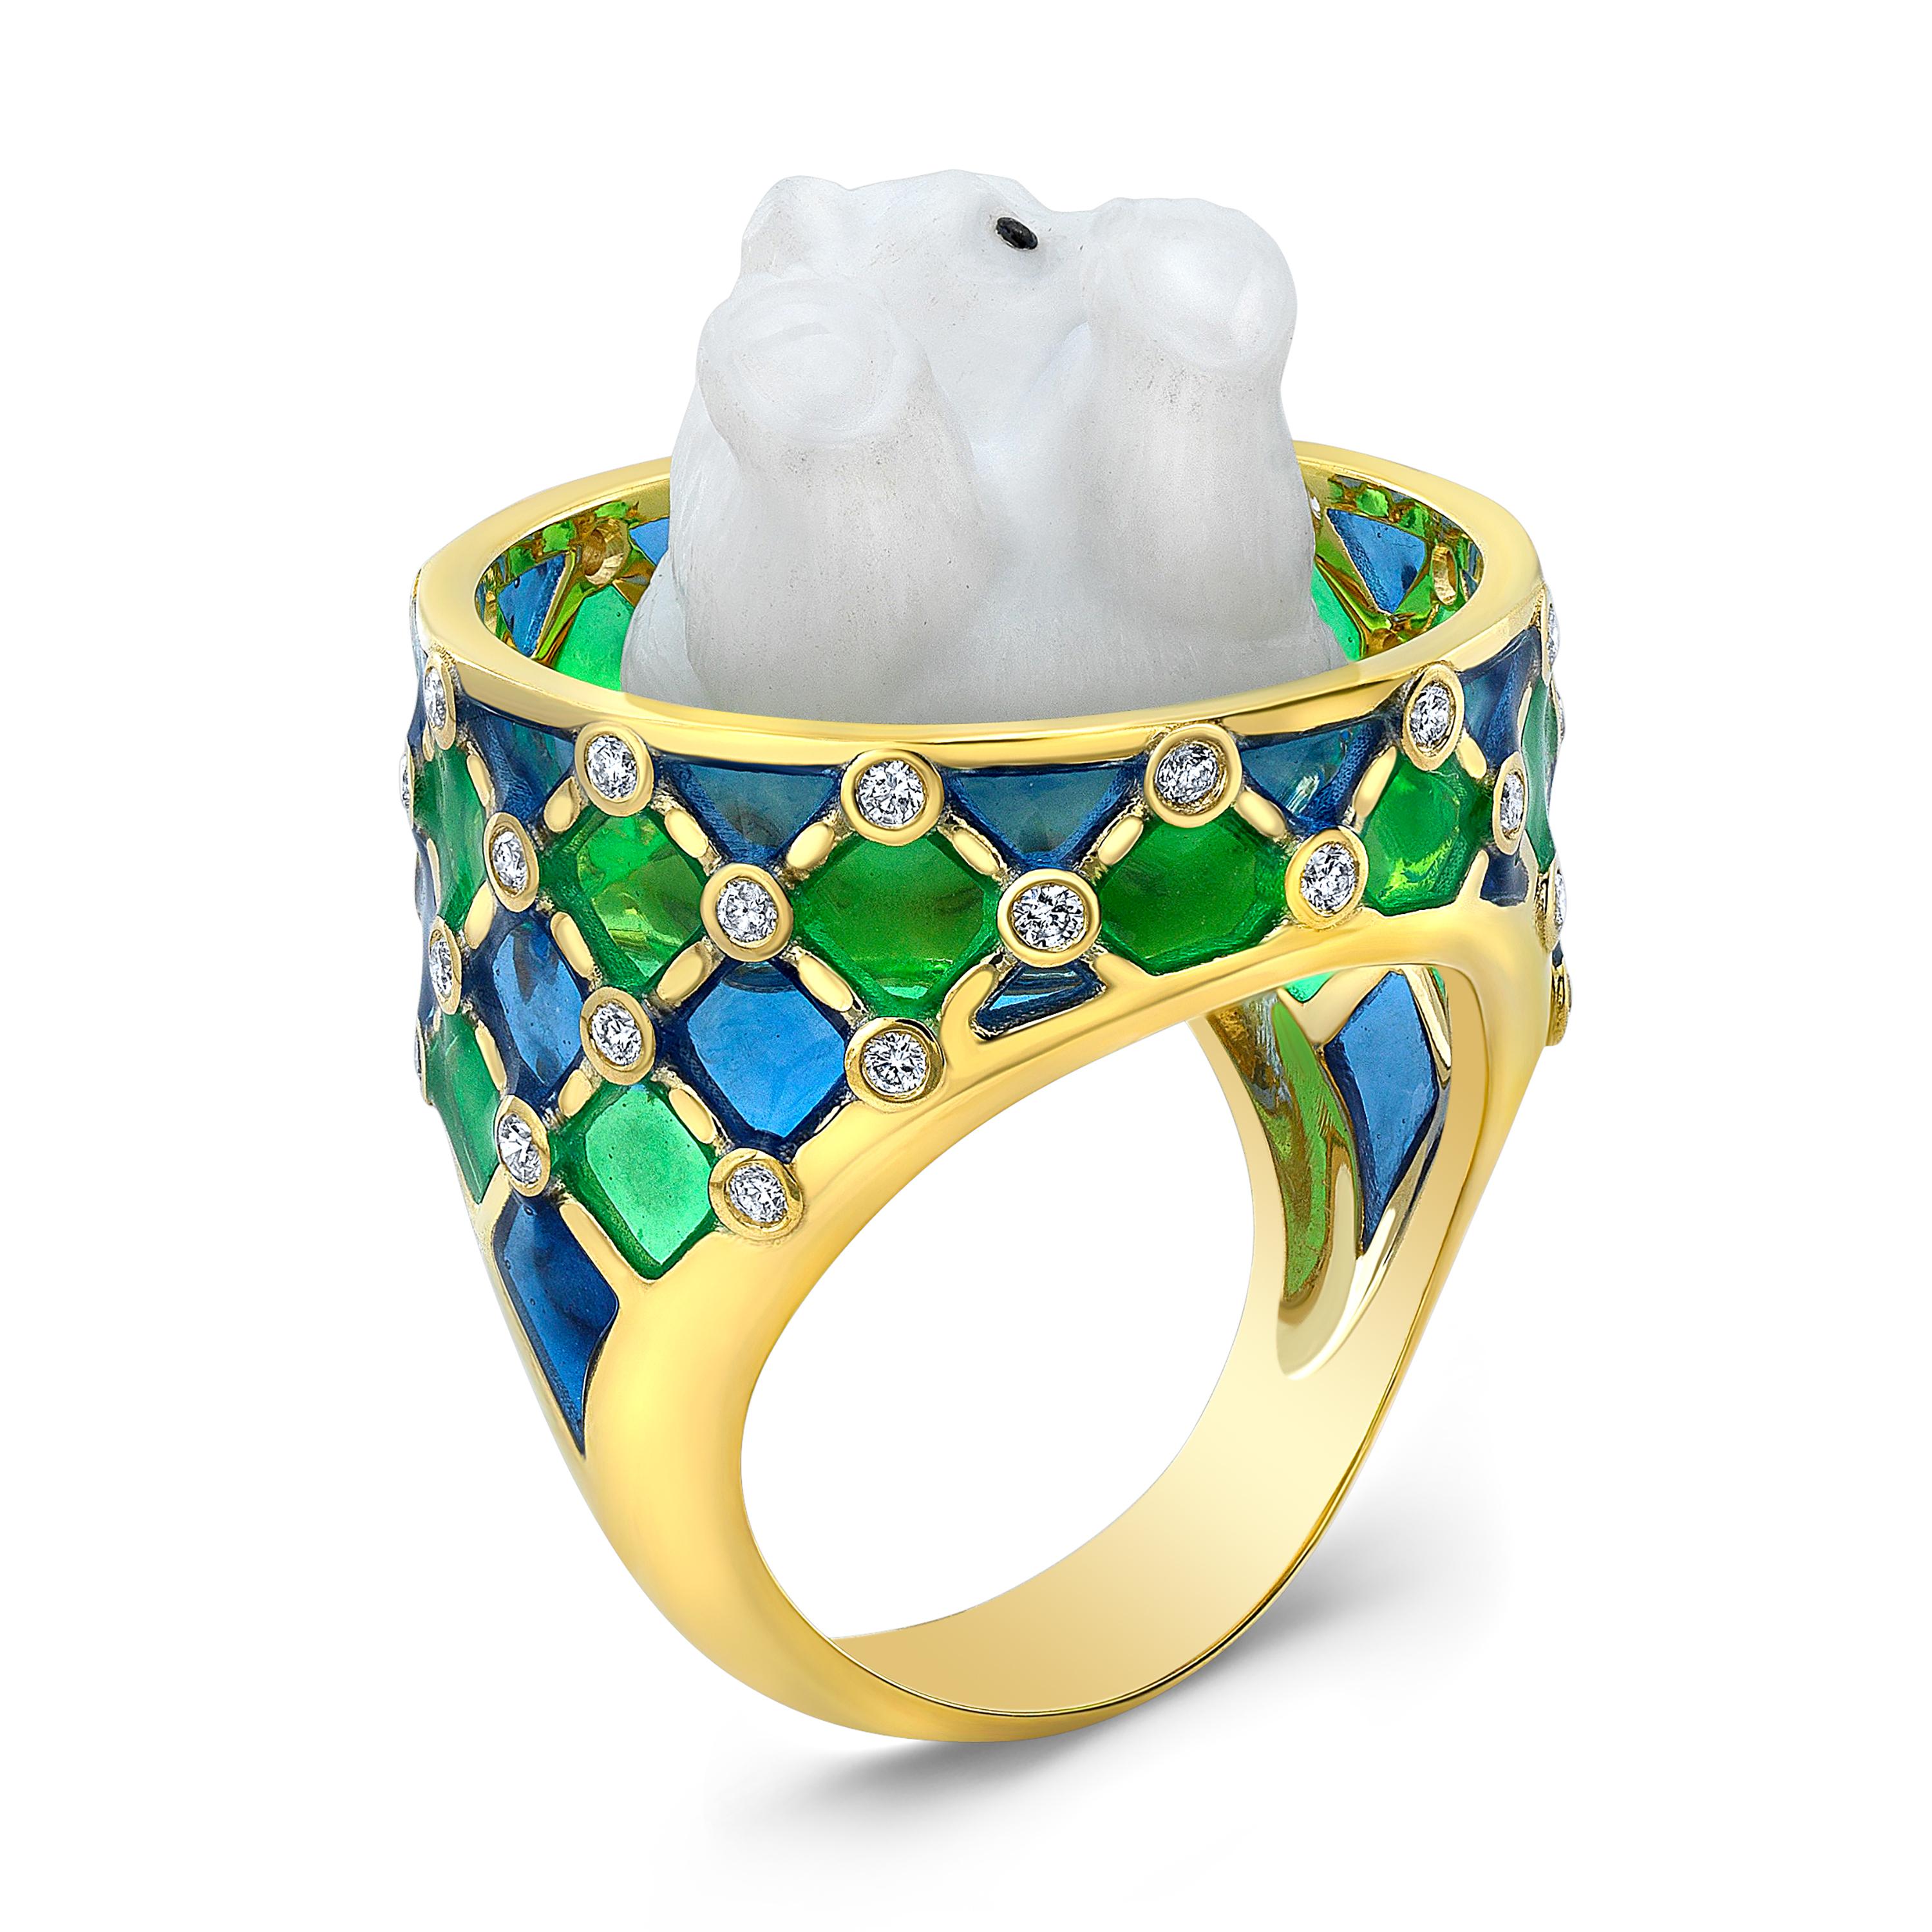 Amy Y's amusing carved white opal bear; diamond and enamel ring is a one-of-a-kind gem. Her life in the Rockies and visits to Alaska were her inspirations to create this truly splendid and playful contemporary handmade ring Oreo. Especially created